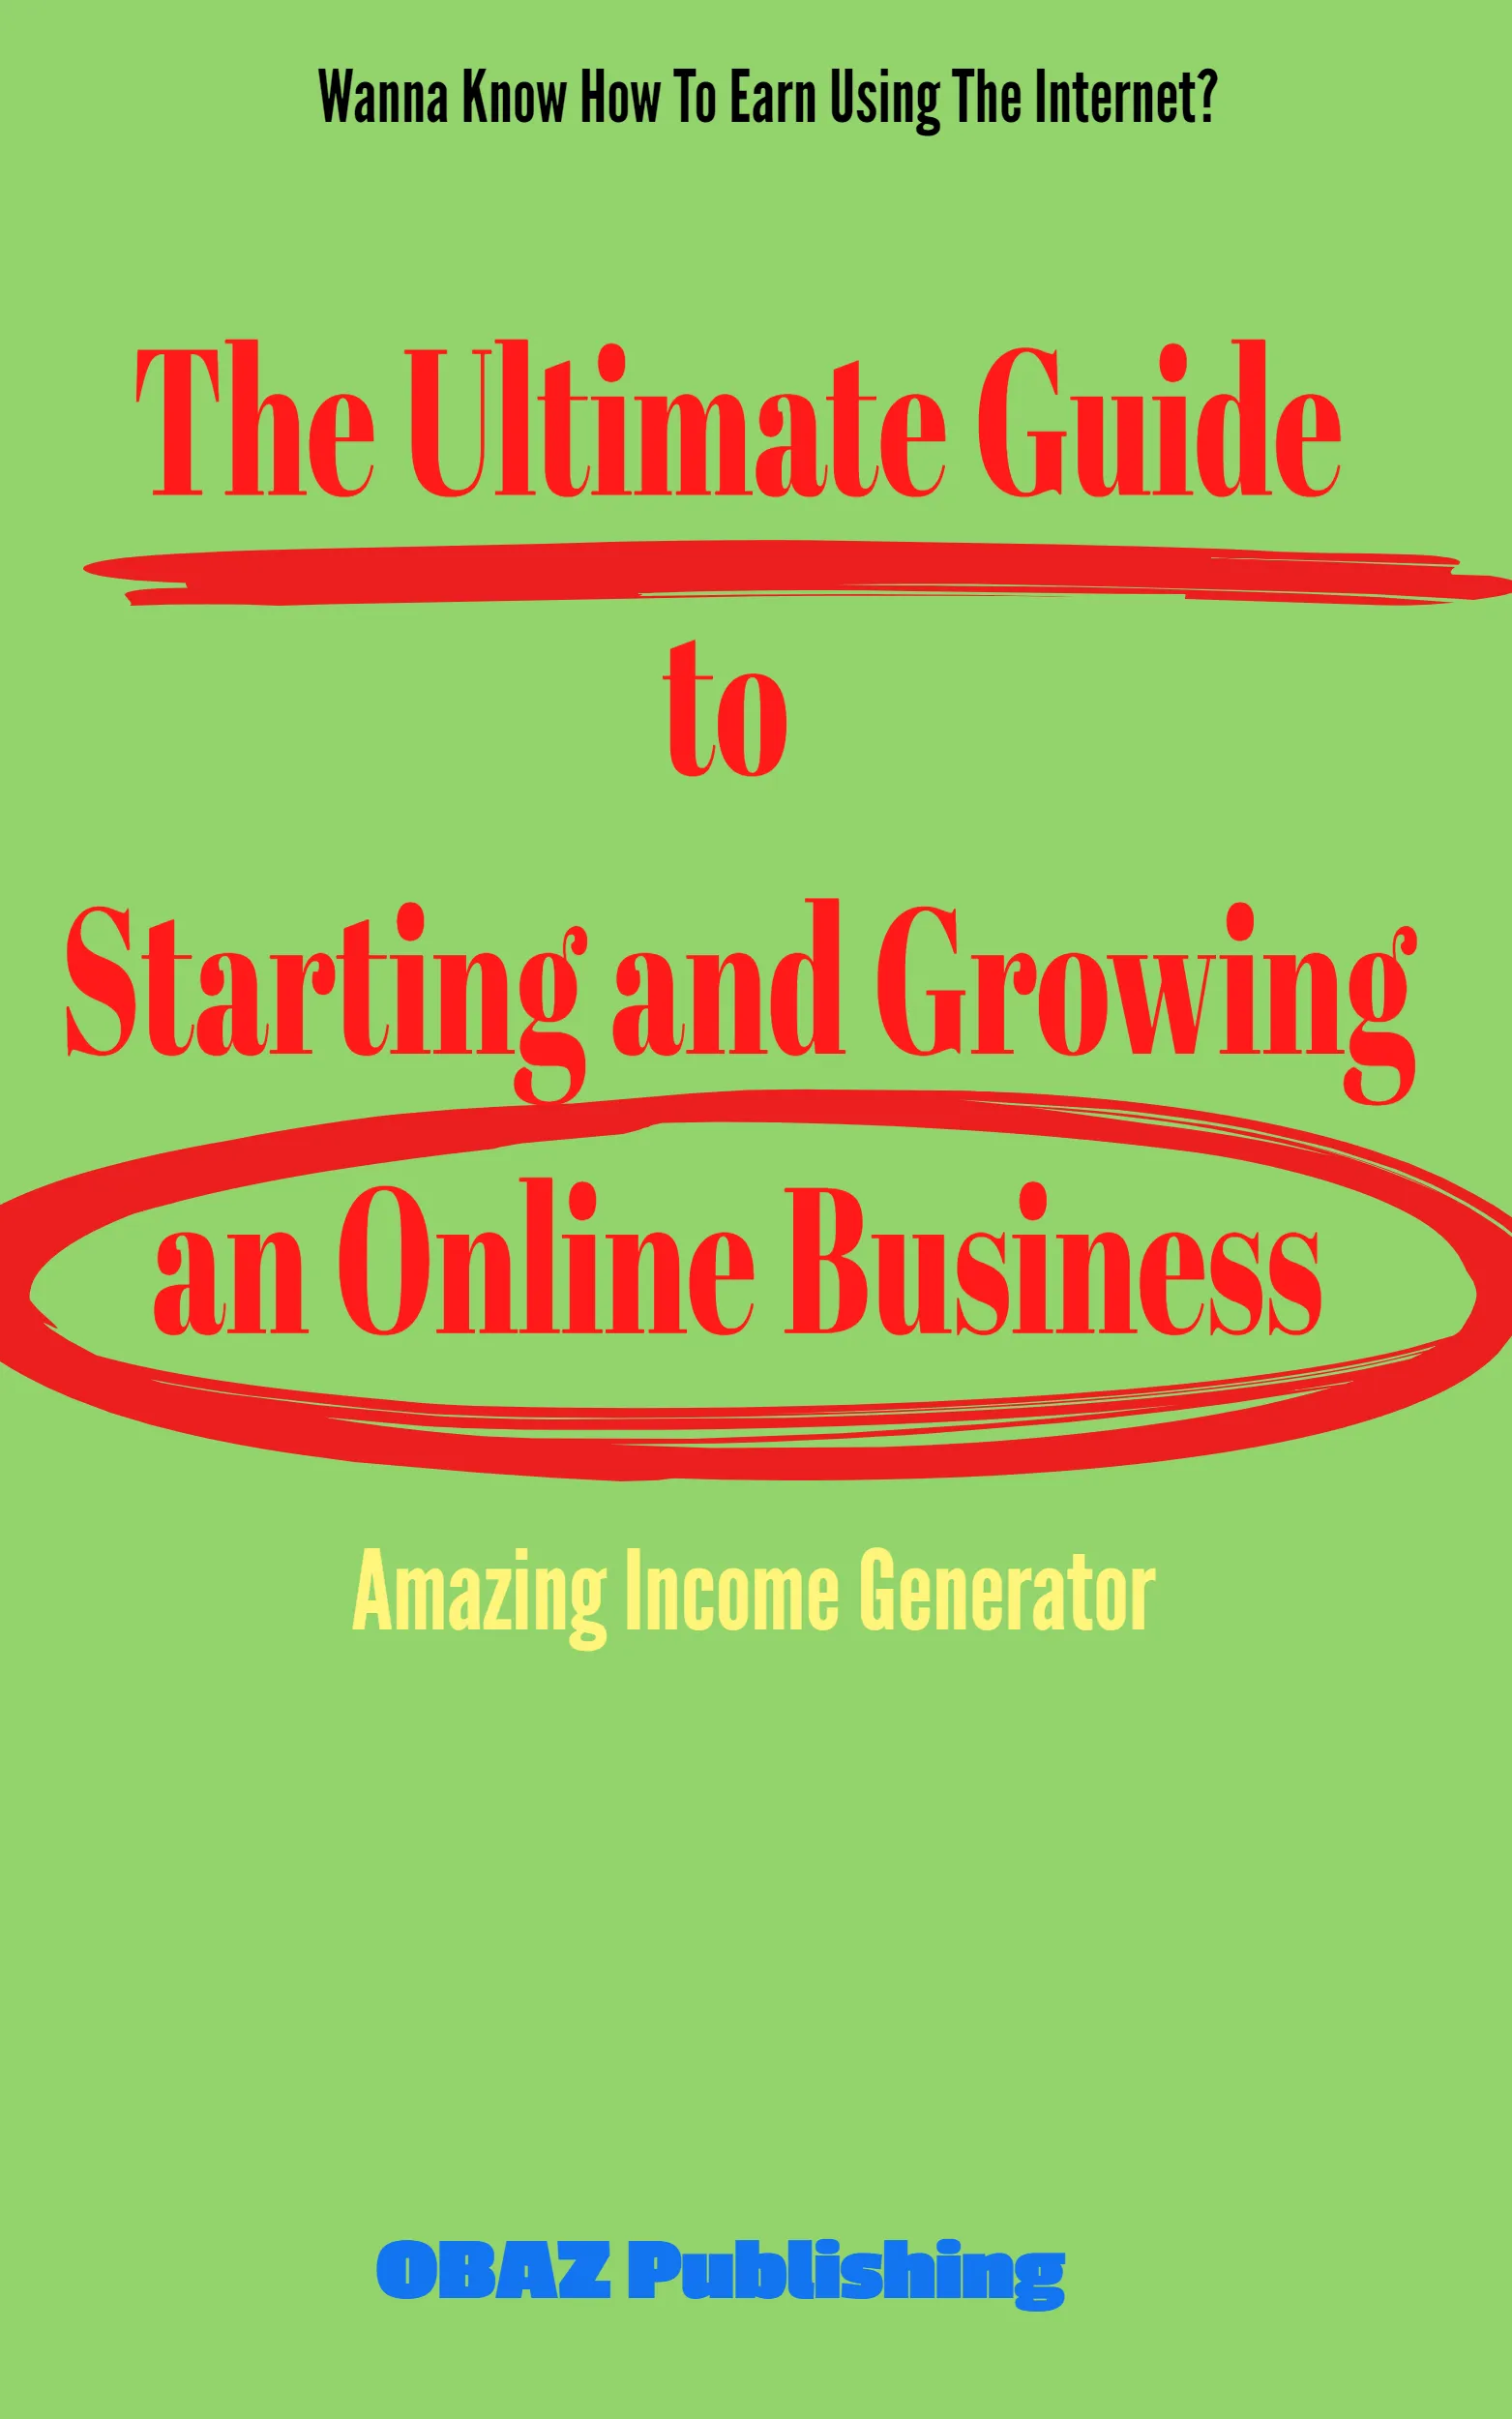 The Ultimate Guide to Starting and Growing an Online Business e cover